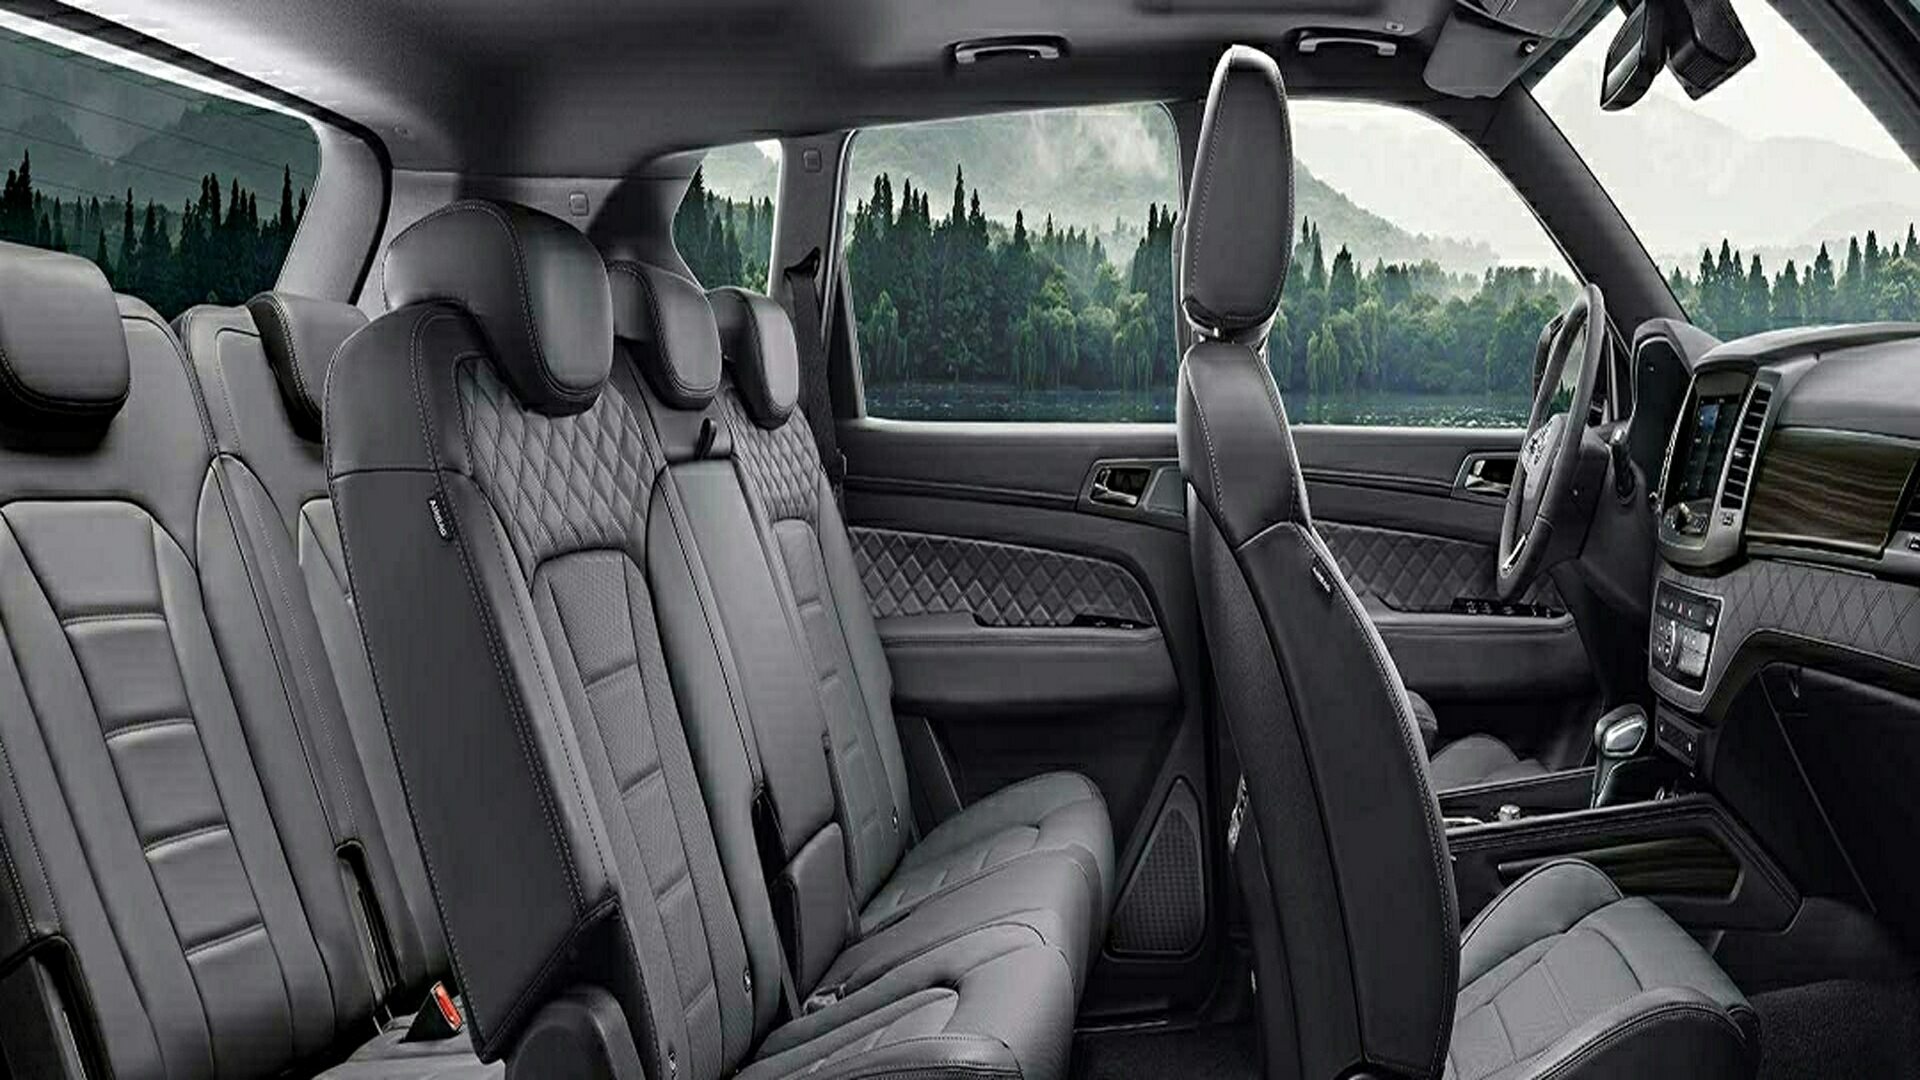 The Interior Of The New Laxury SsangYong Rexton SUV (Credits: SsangYong)